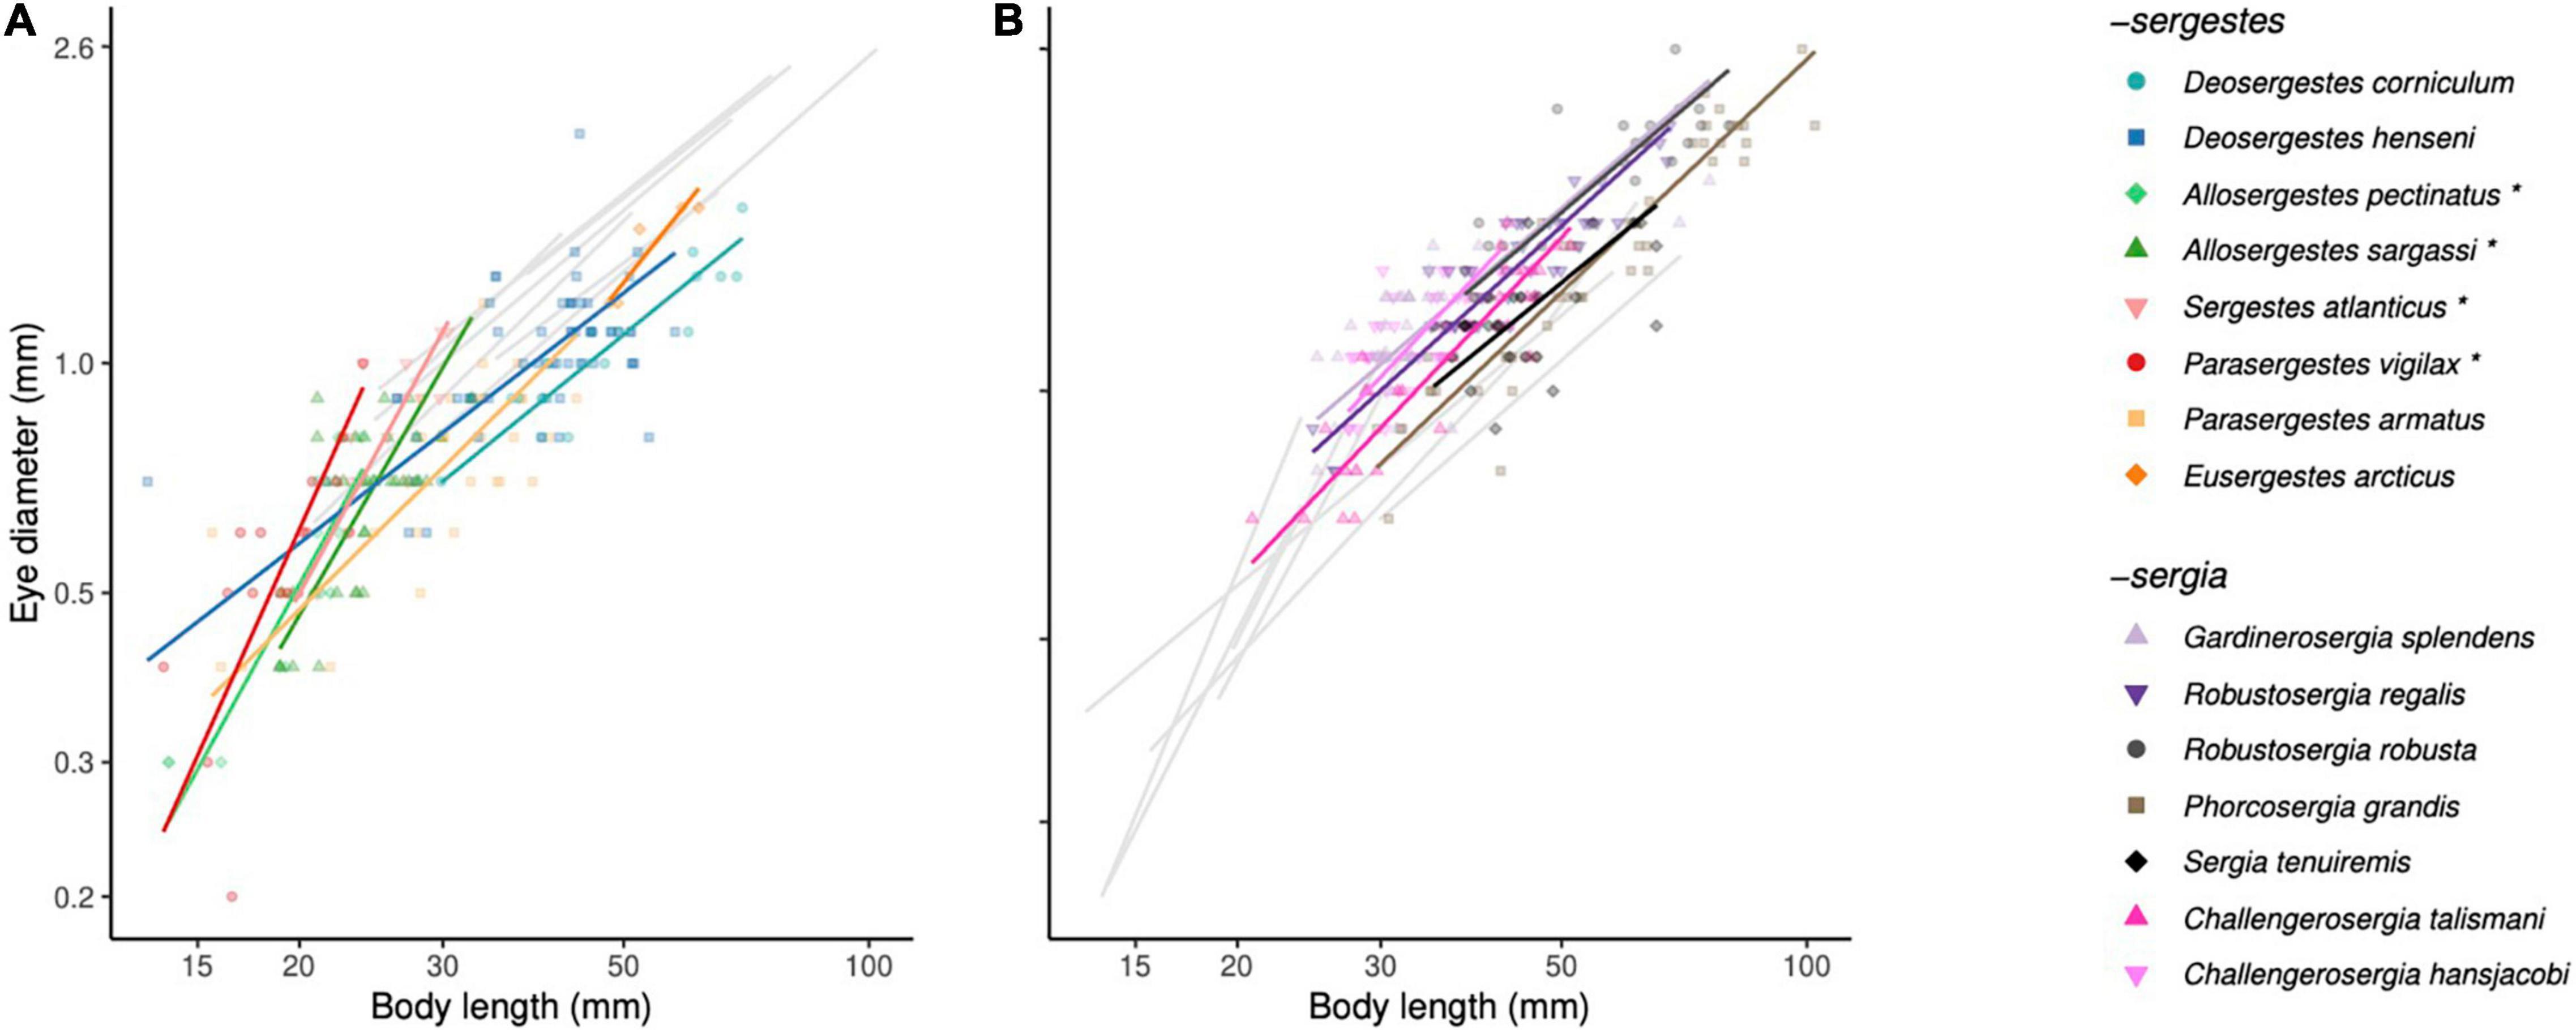 Intraspecific body size variation and allometry of genitalia in